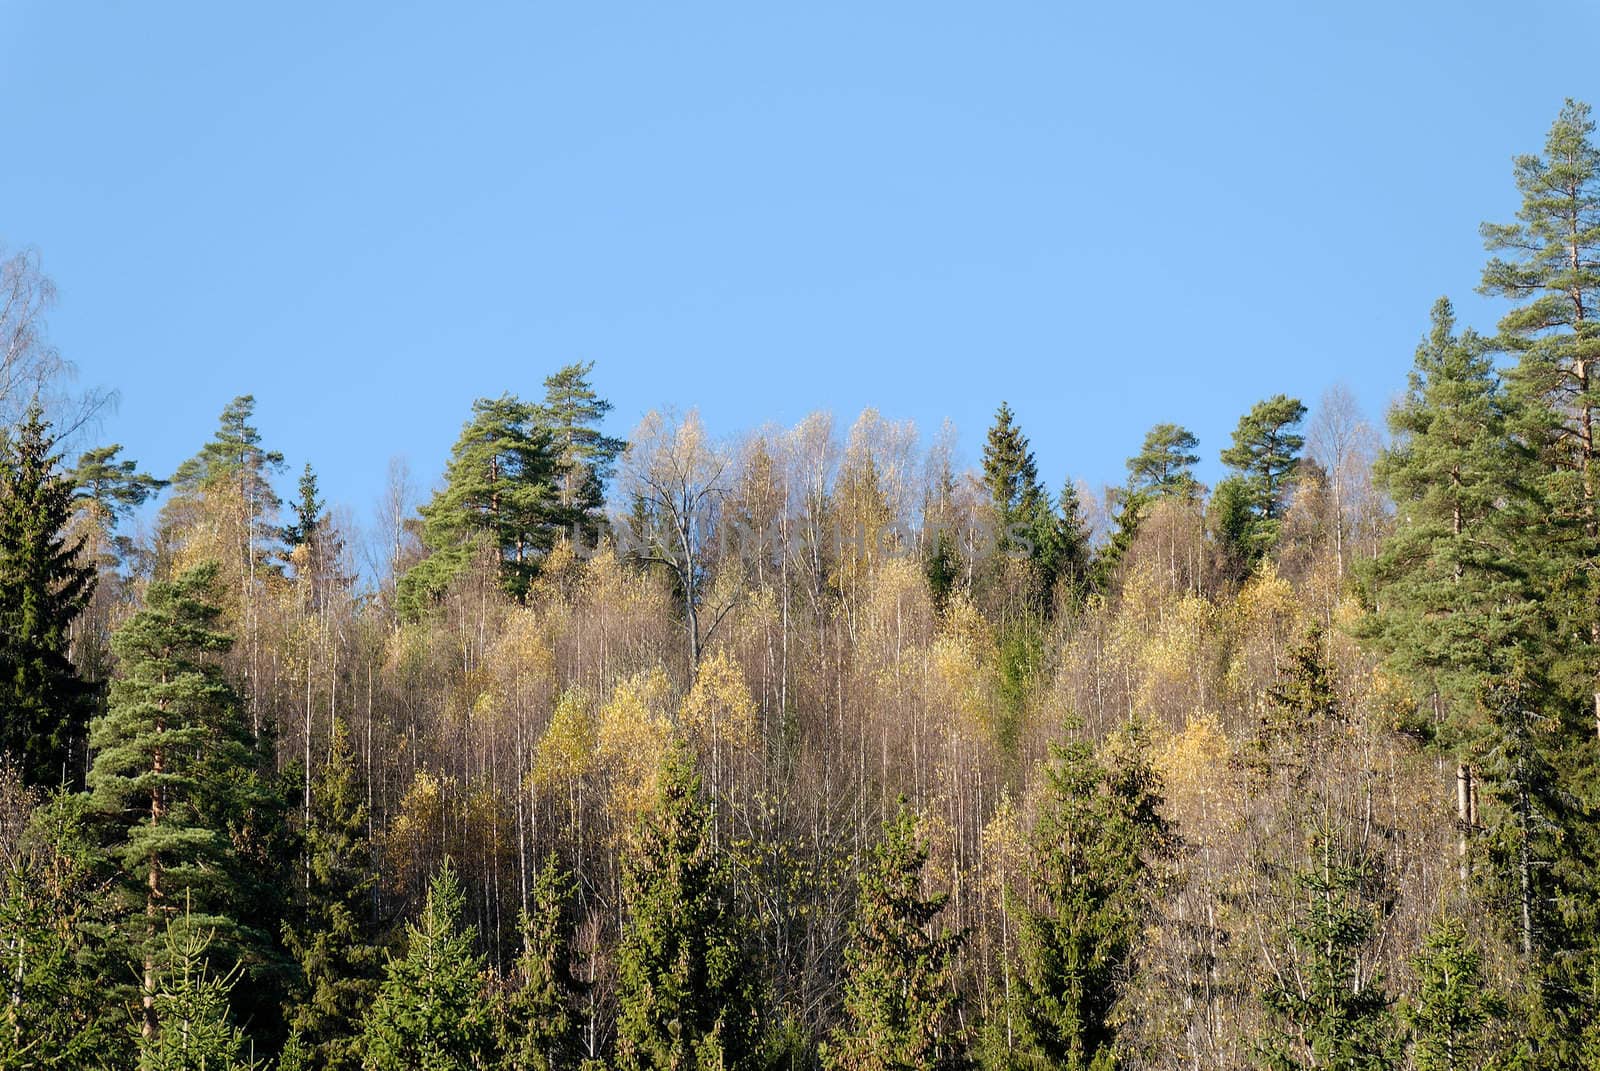 Yellow Birches, green firs and pines and blue sky.
